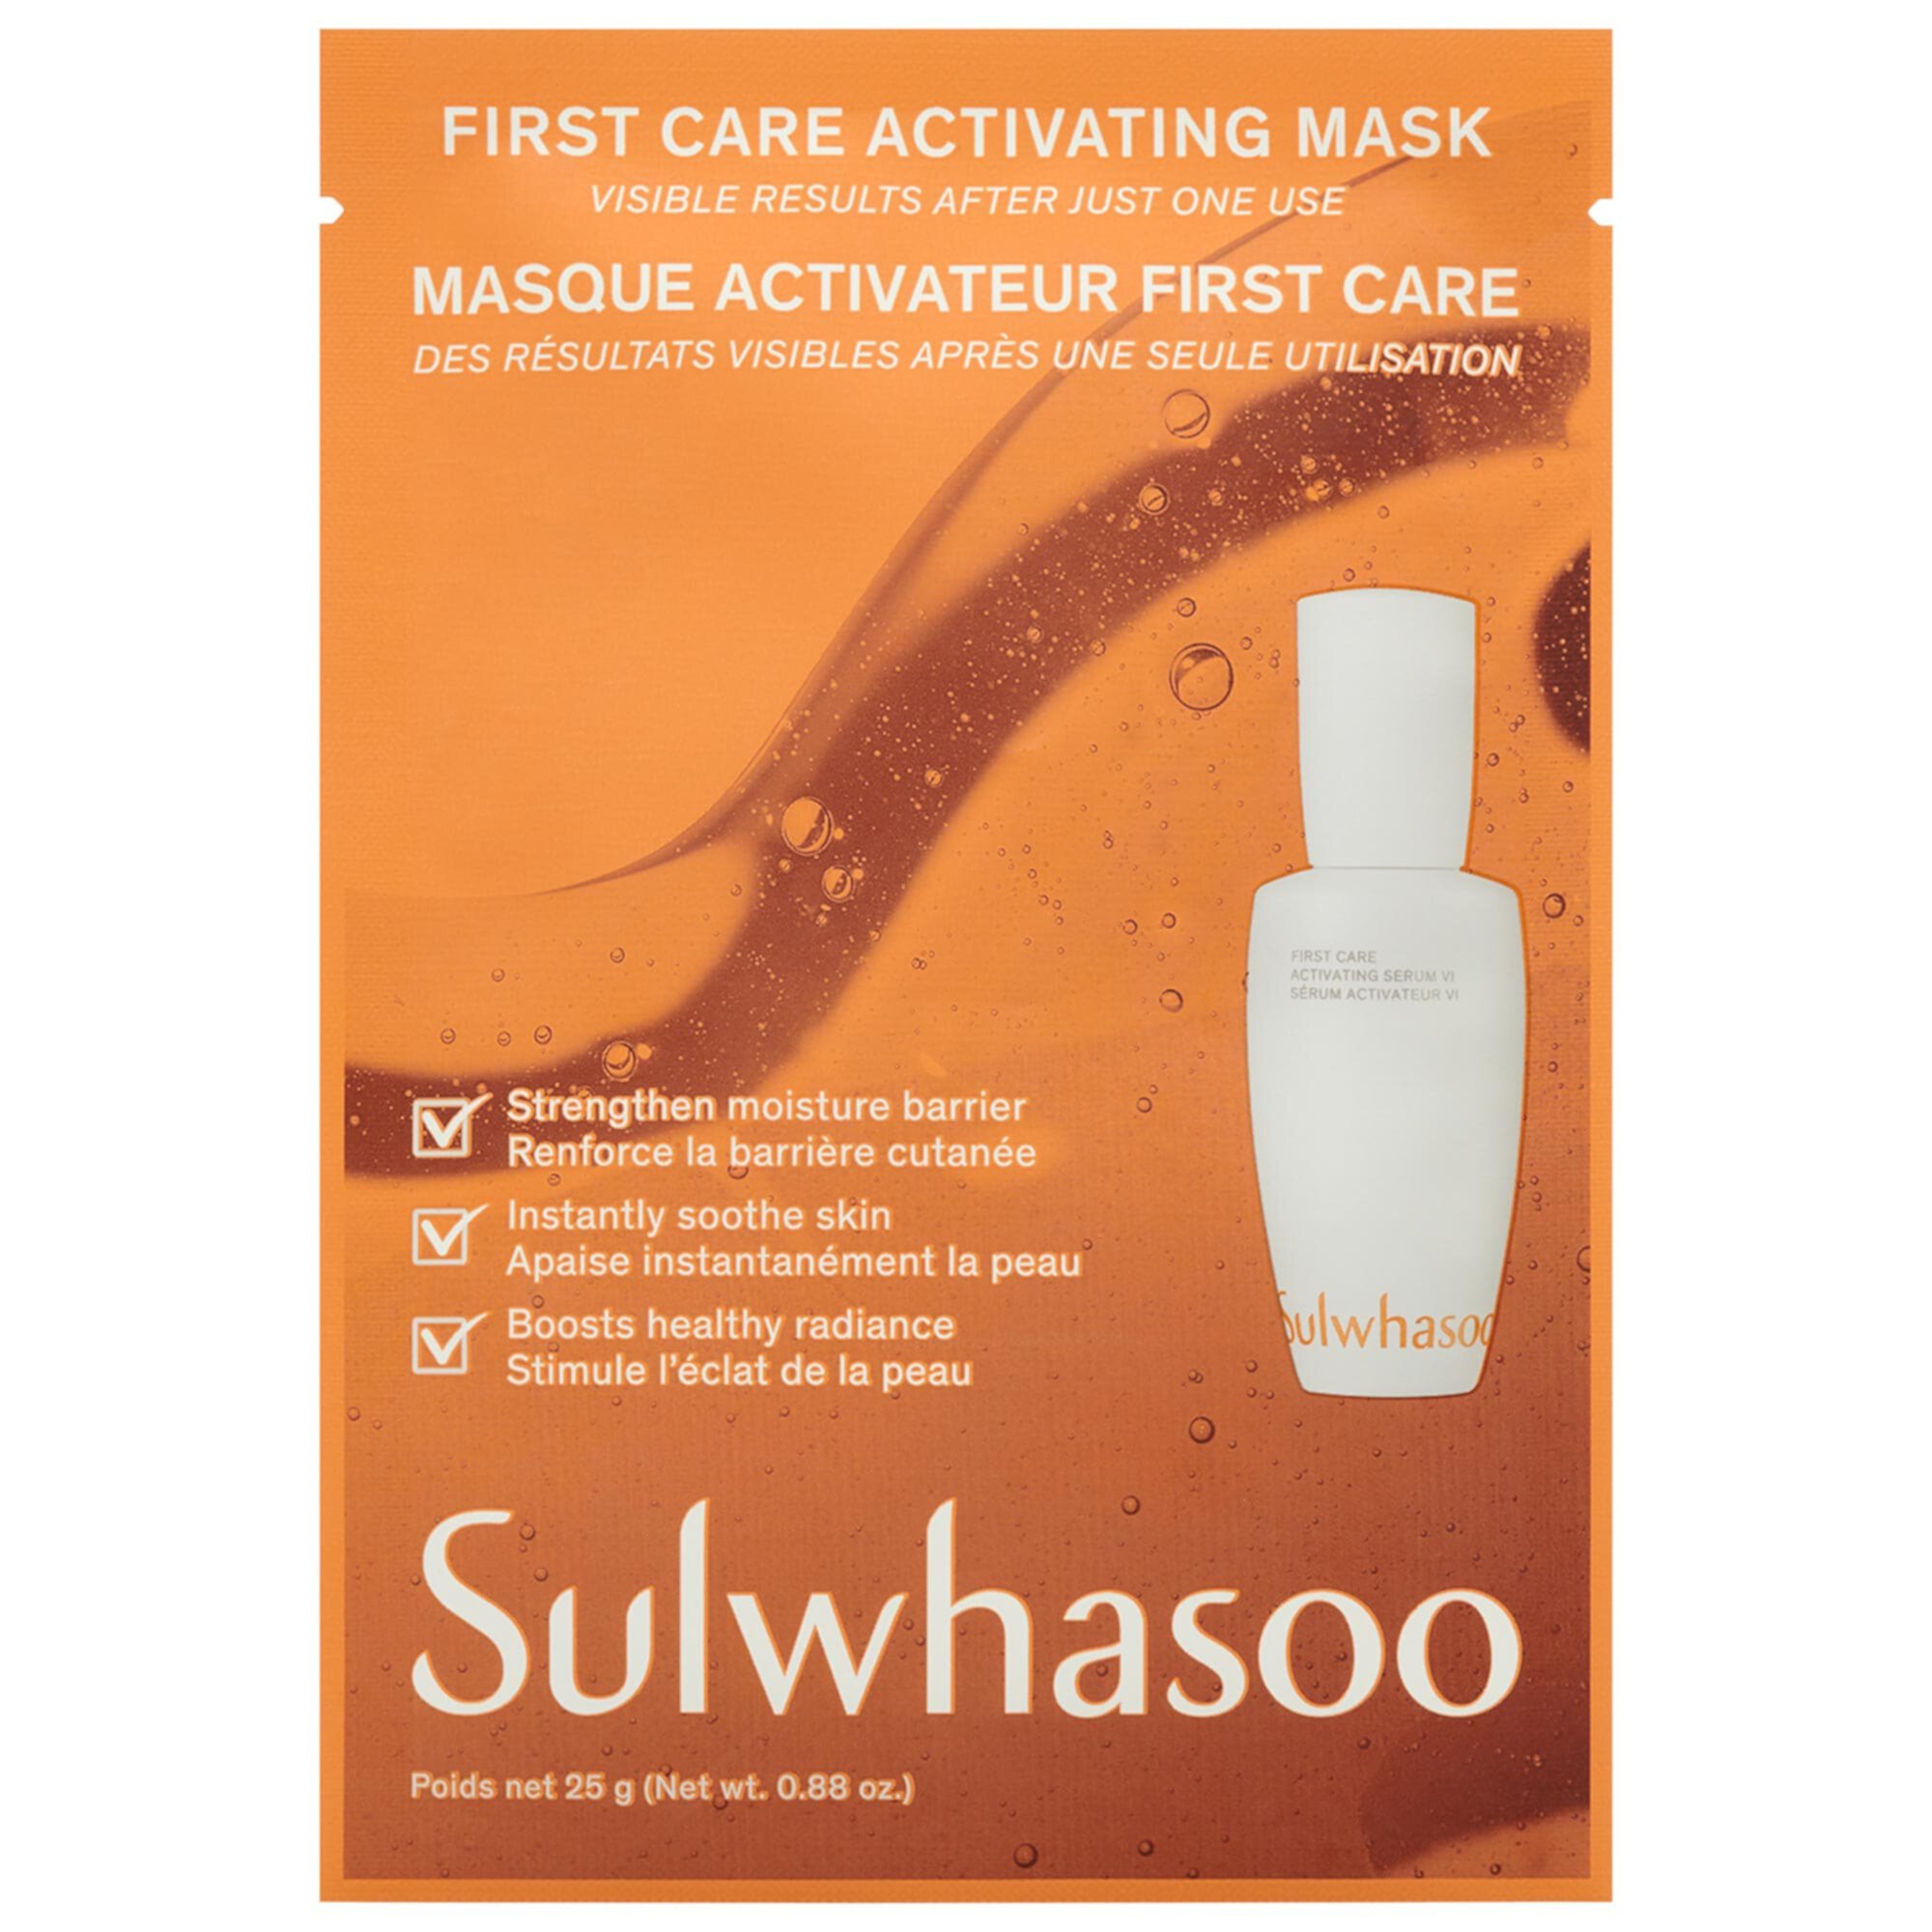 First Care Activating Single Sheet Mask Sulwhasoo